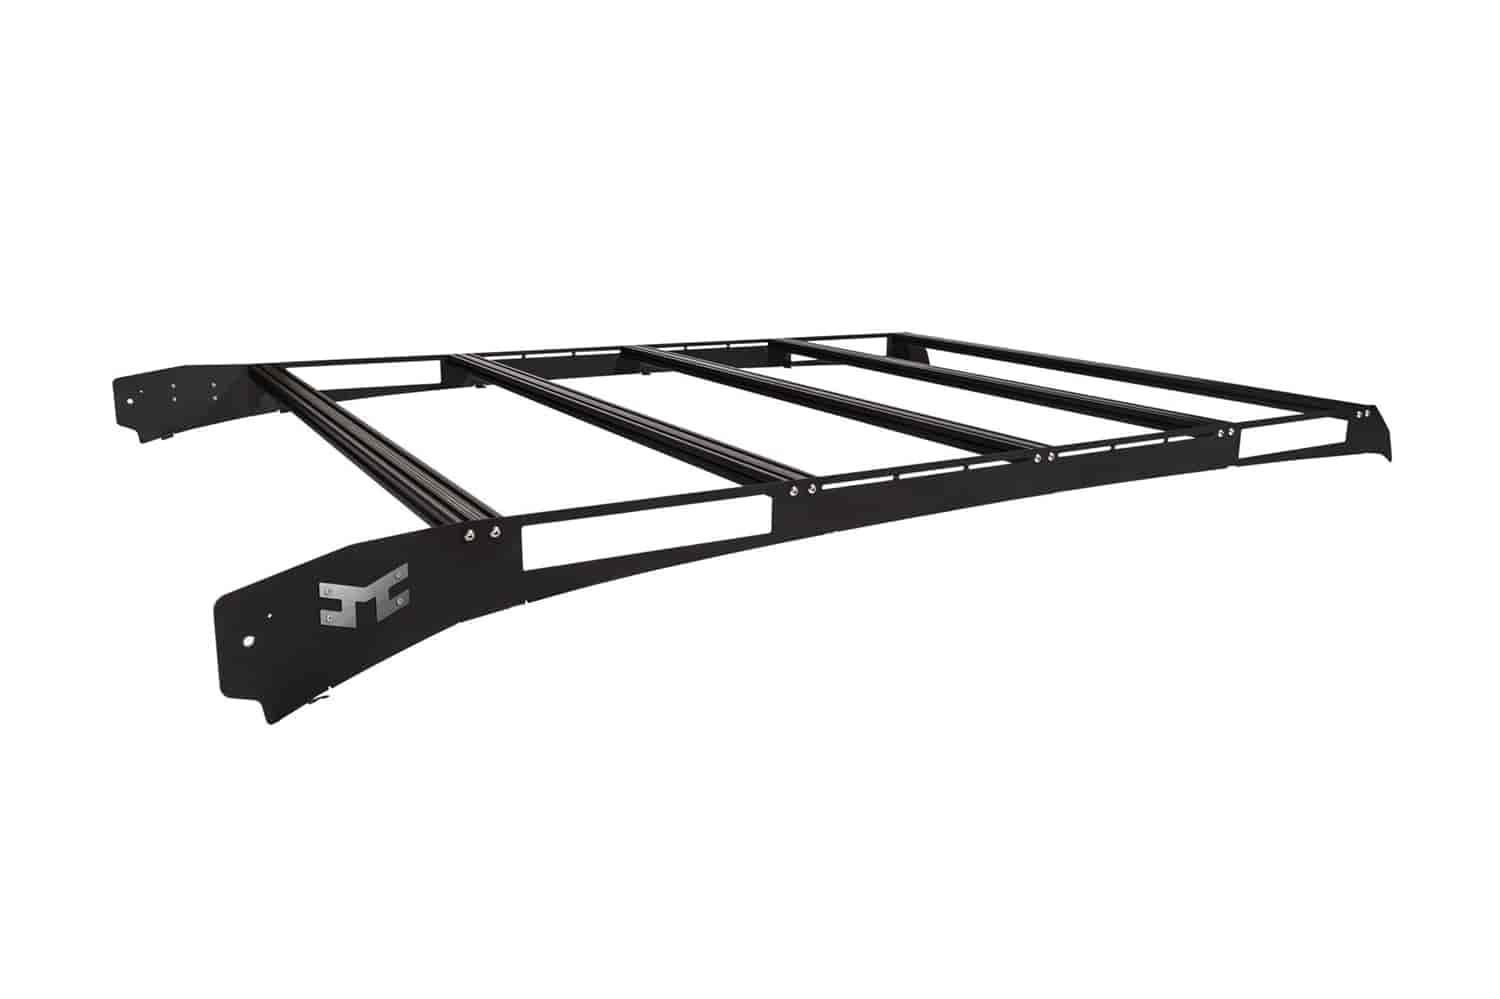 Performance Roof Rack for 2009-2014 Ford F-150 SuperCrew Cab Trucks